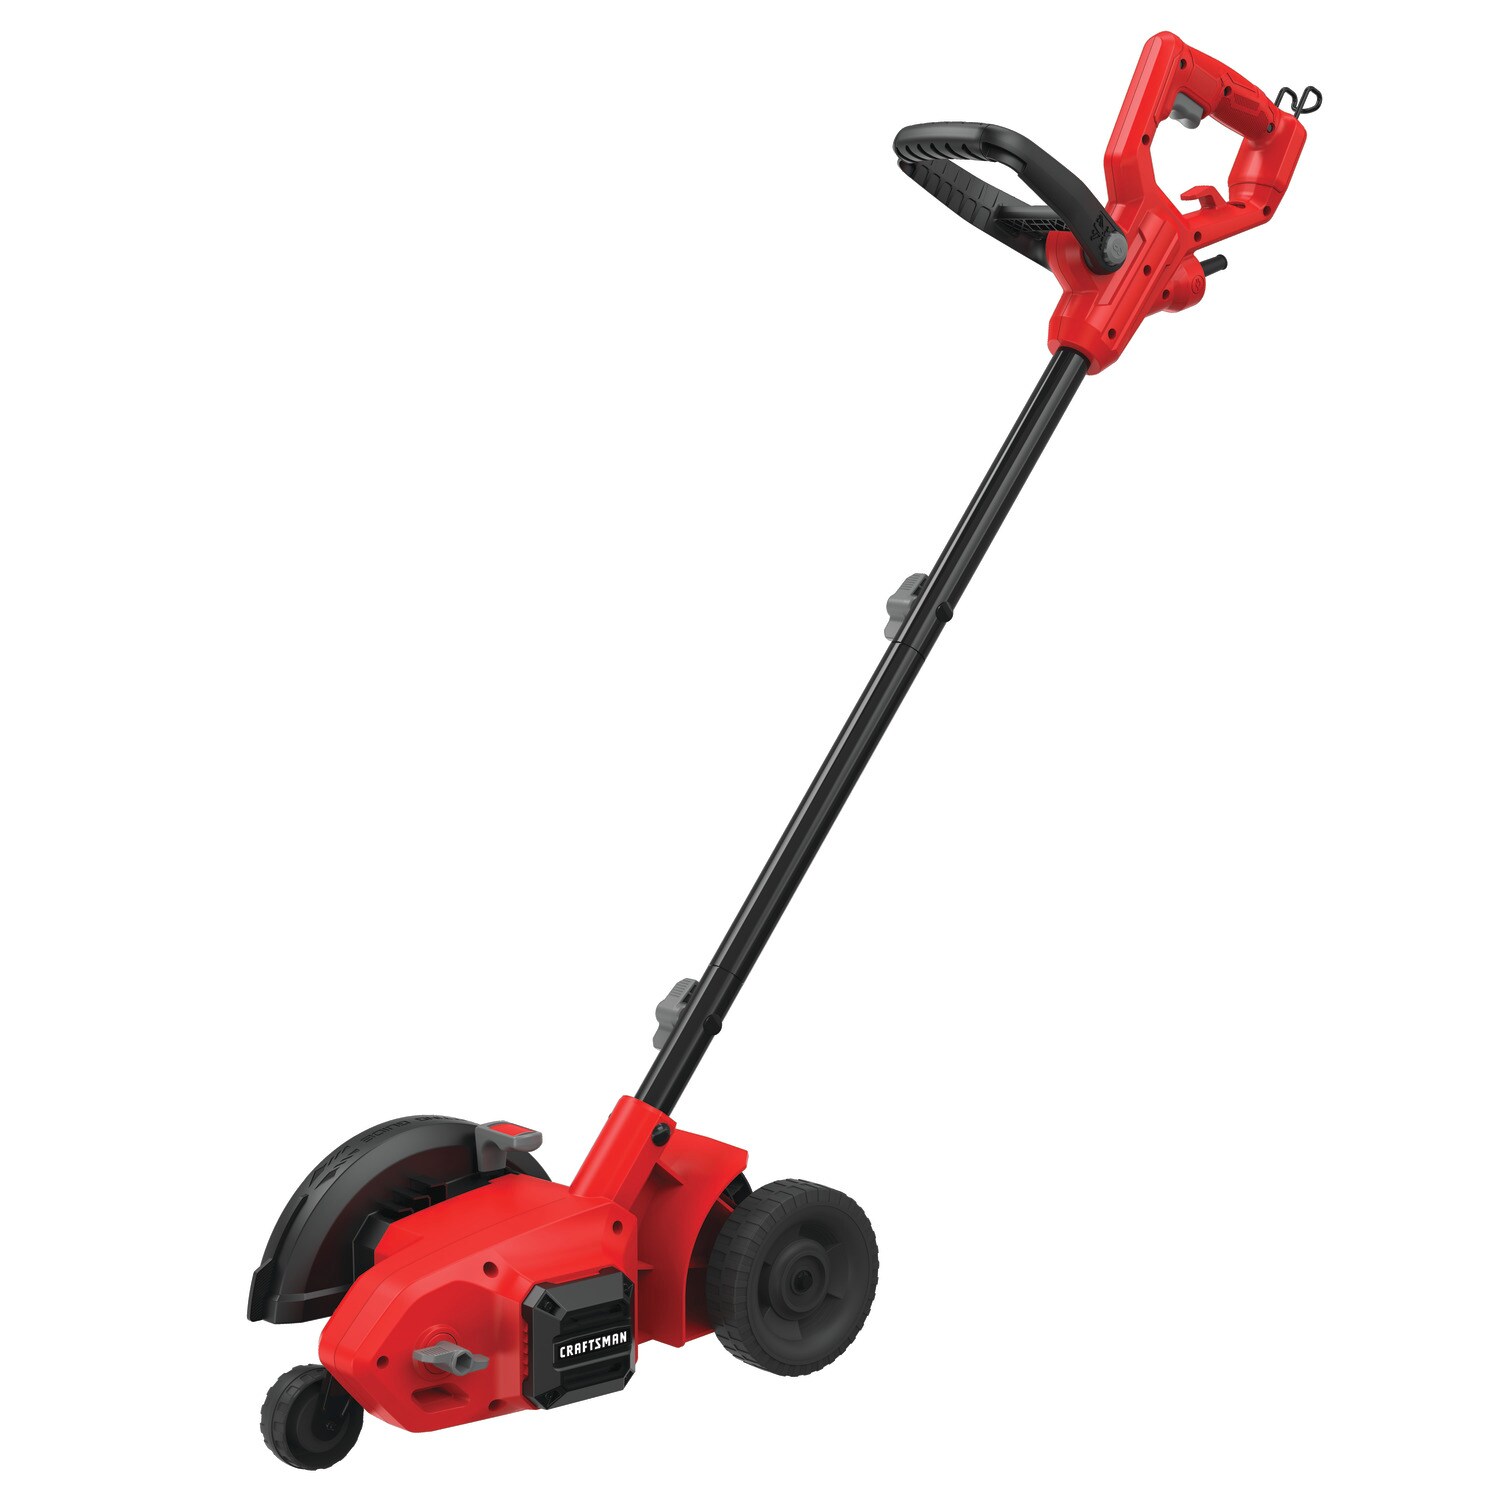 Image of Edger for Craftsman riding mower